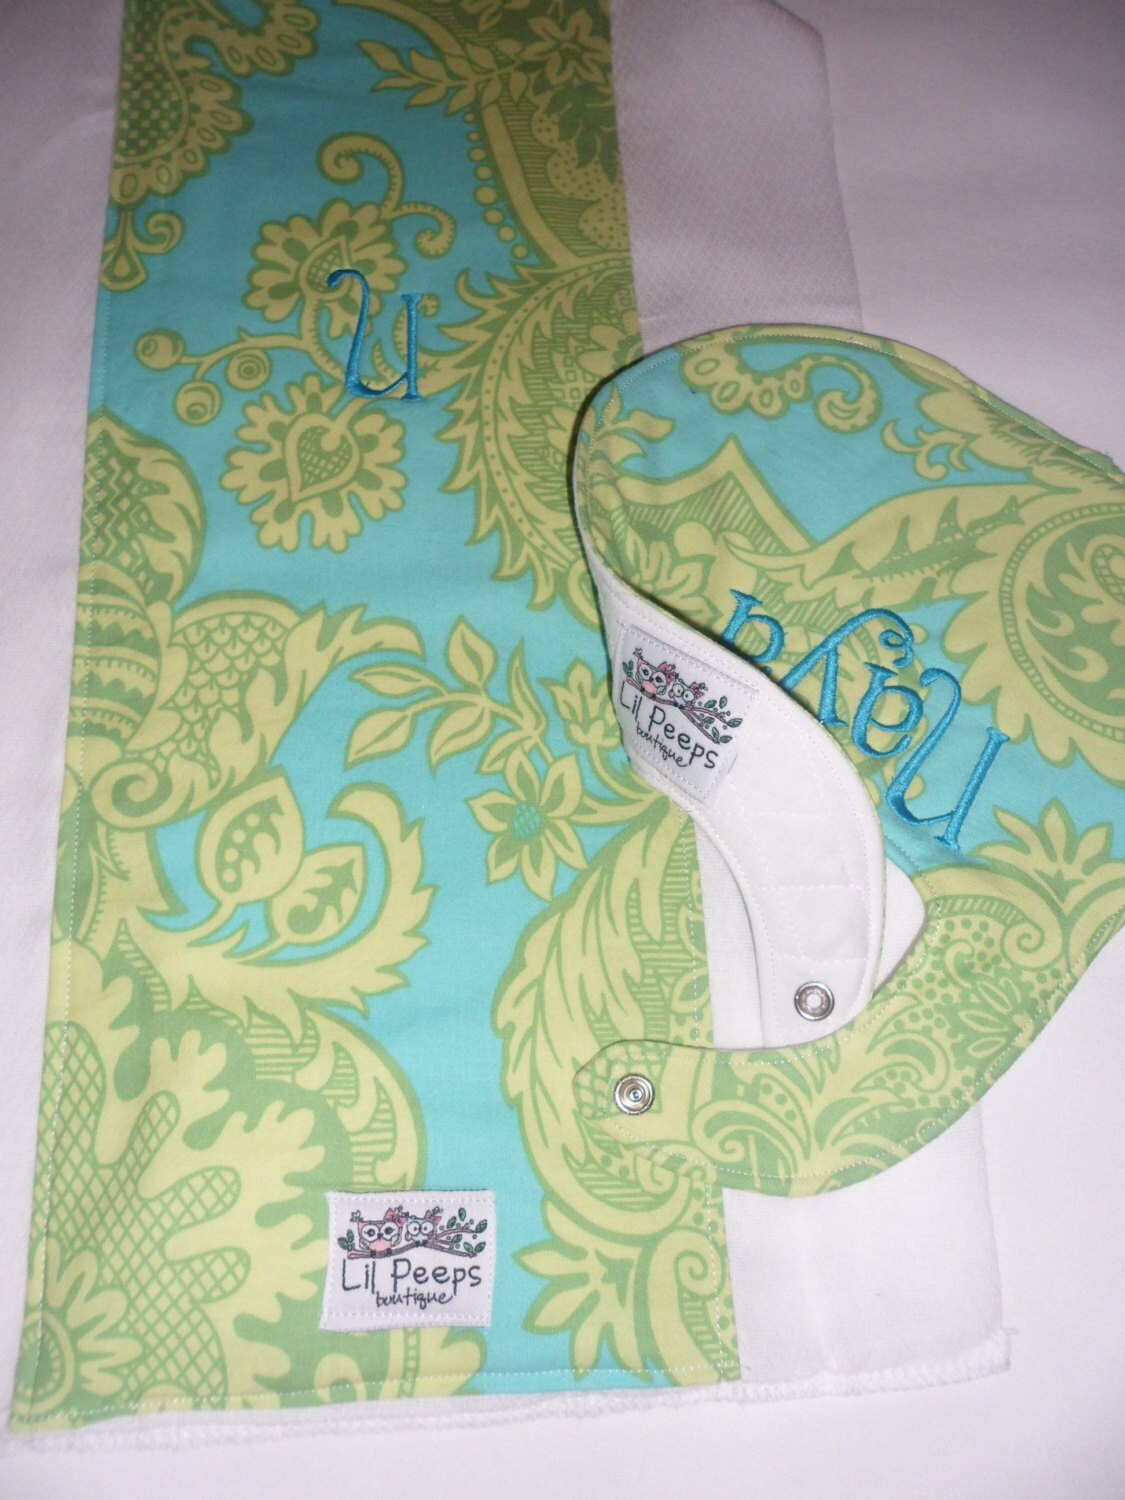 Personalized Boutique Bib and Burp Cloth Set - Amy Butler Love Sandlewood Turquoise - Custom Monogrammed